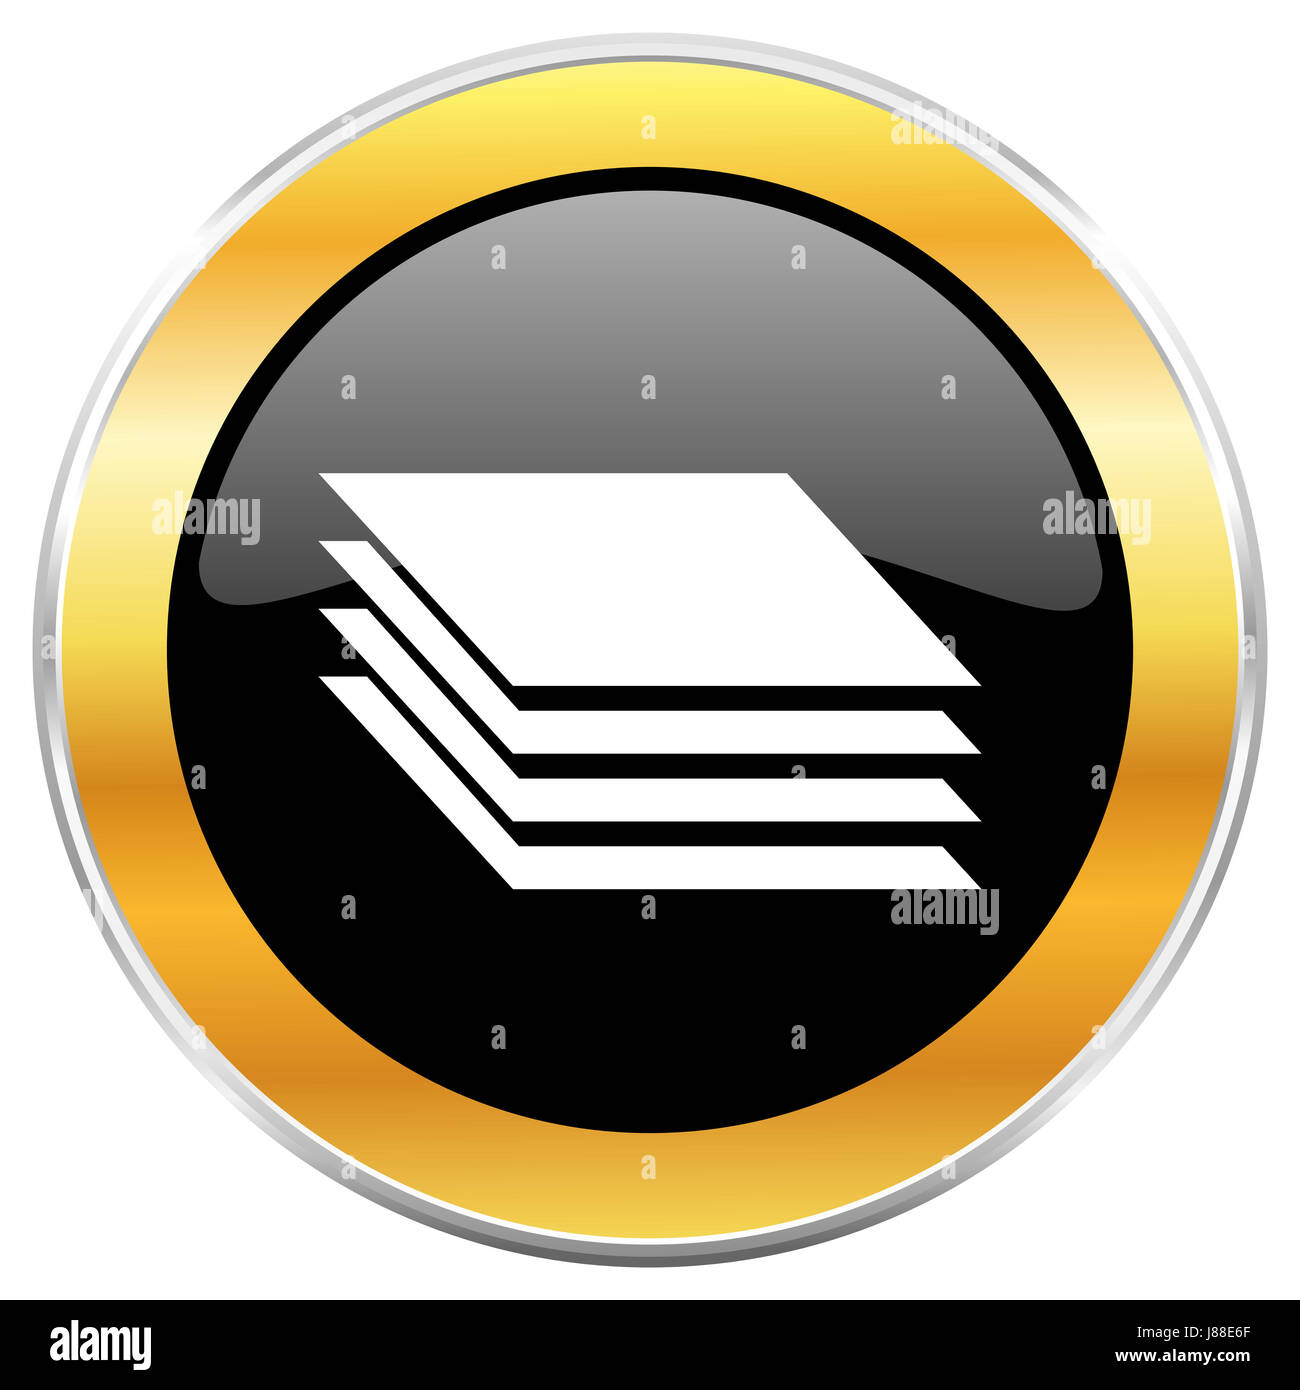 Layers black web icon with golden border isolated on white background. Round glossy button. Stock Photo